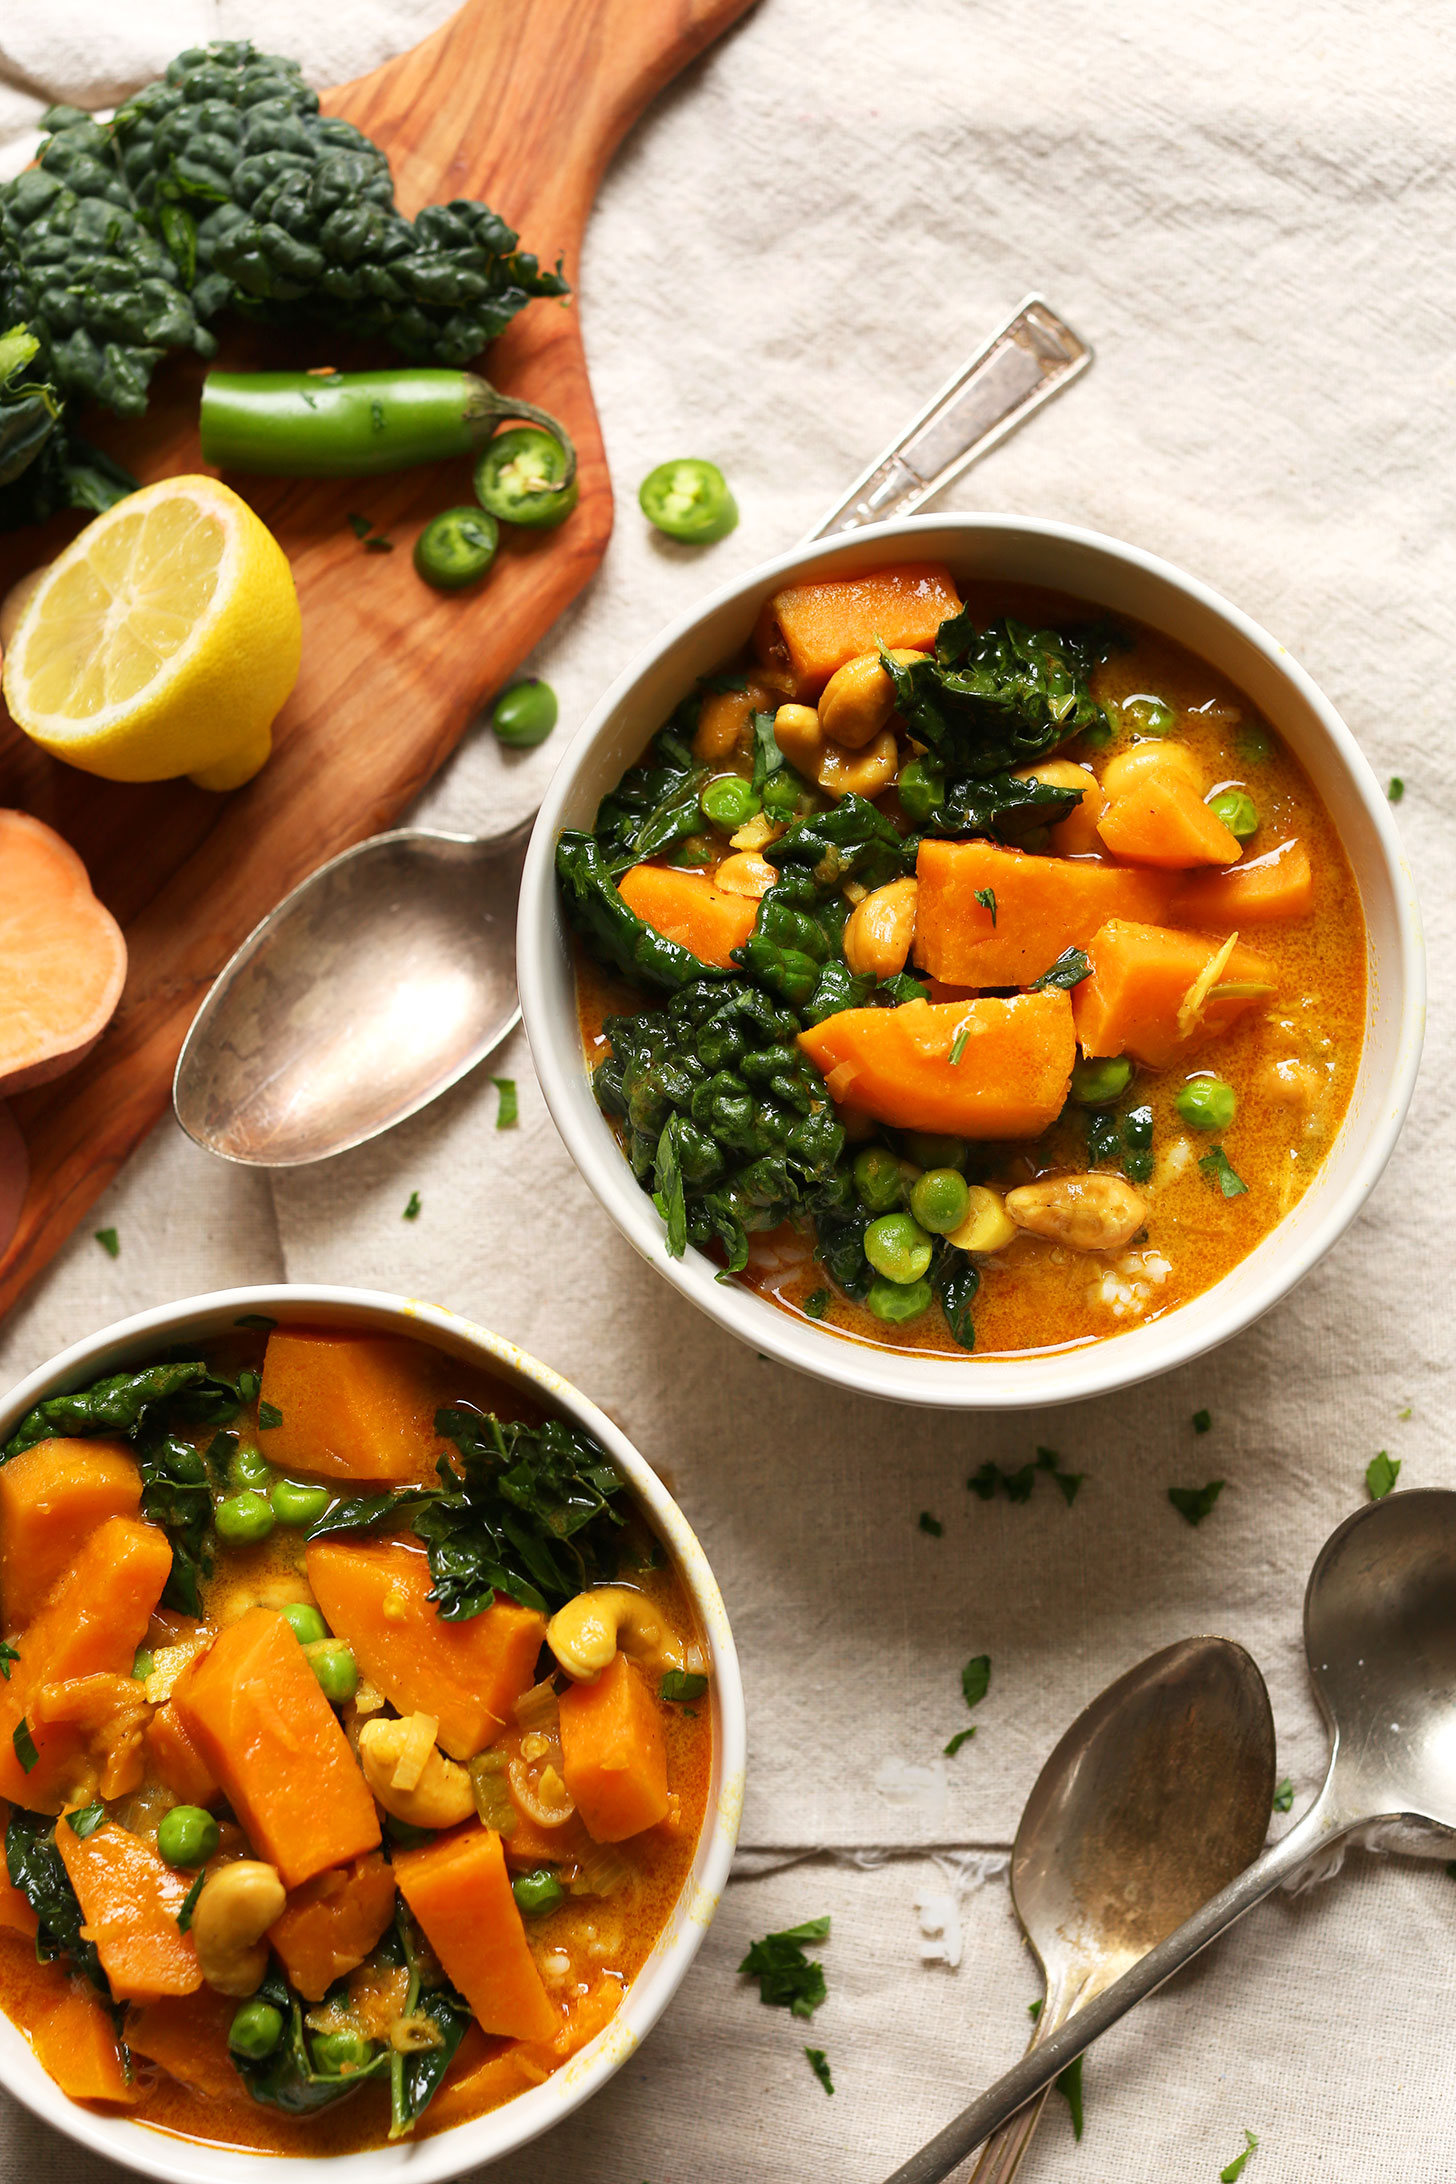 Two bowls of our delicious protein-rich vegan Sweet Potato Kale Curry